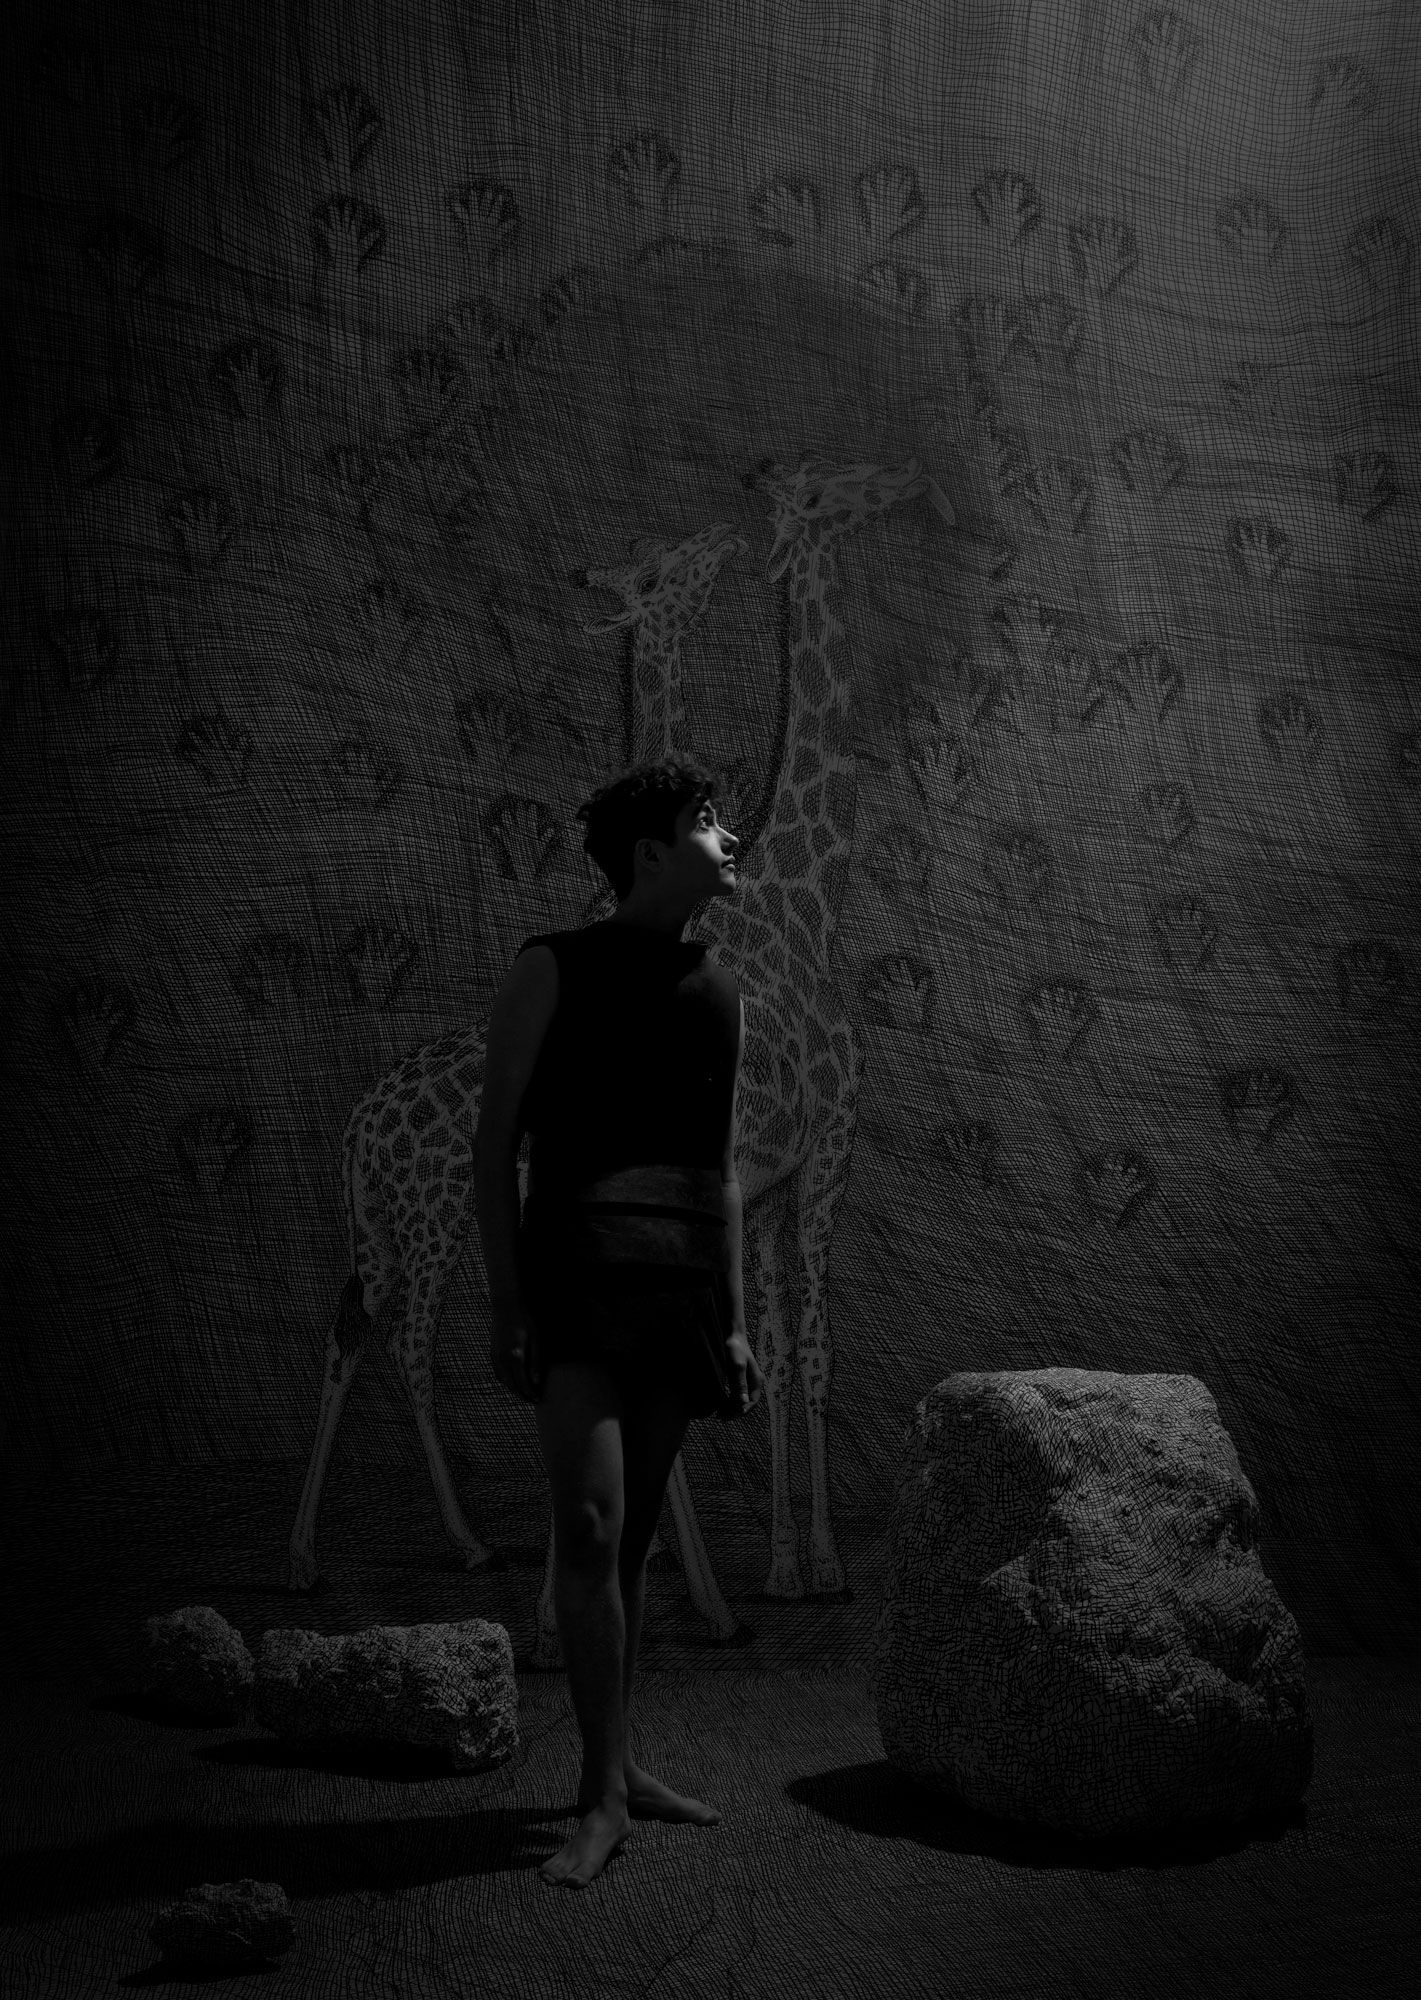 Boy in dark attire stands in a cave, looking up, with wall etchings of giraffes and handprints around.